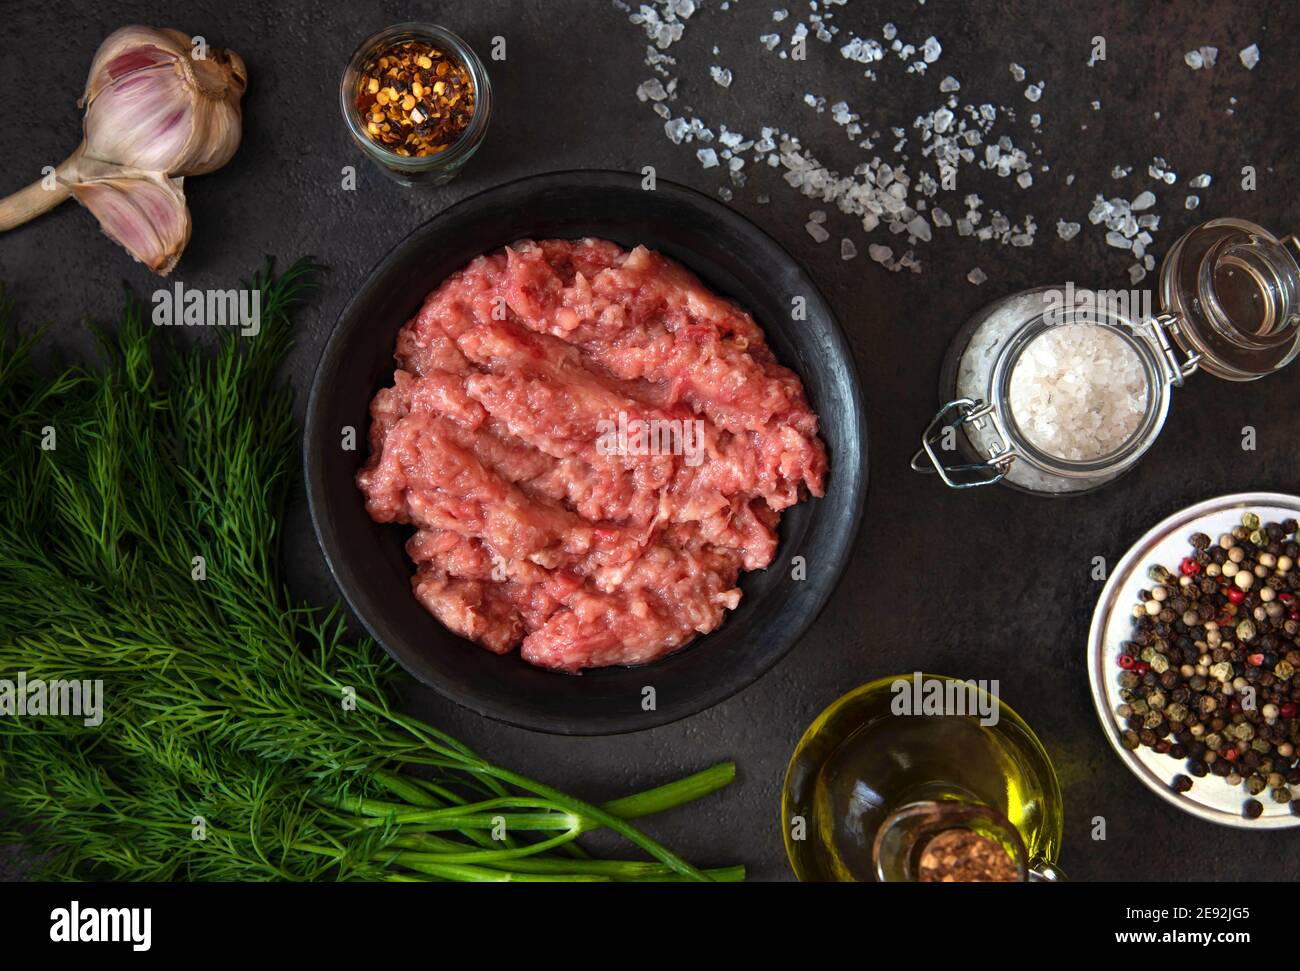 Homemade minced meat in a black bowl with ingredients. Fresh Raw mince. Top view. Stock Photo